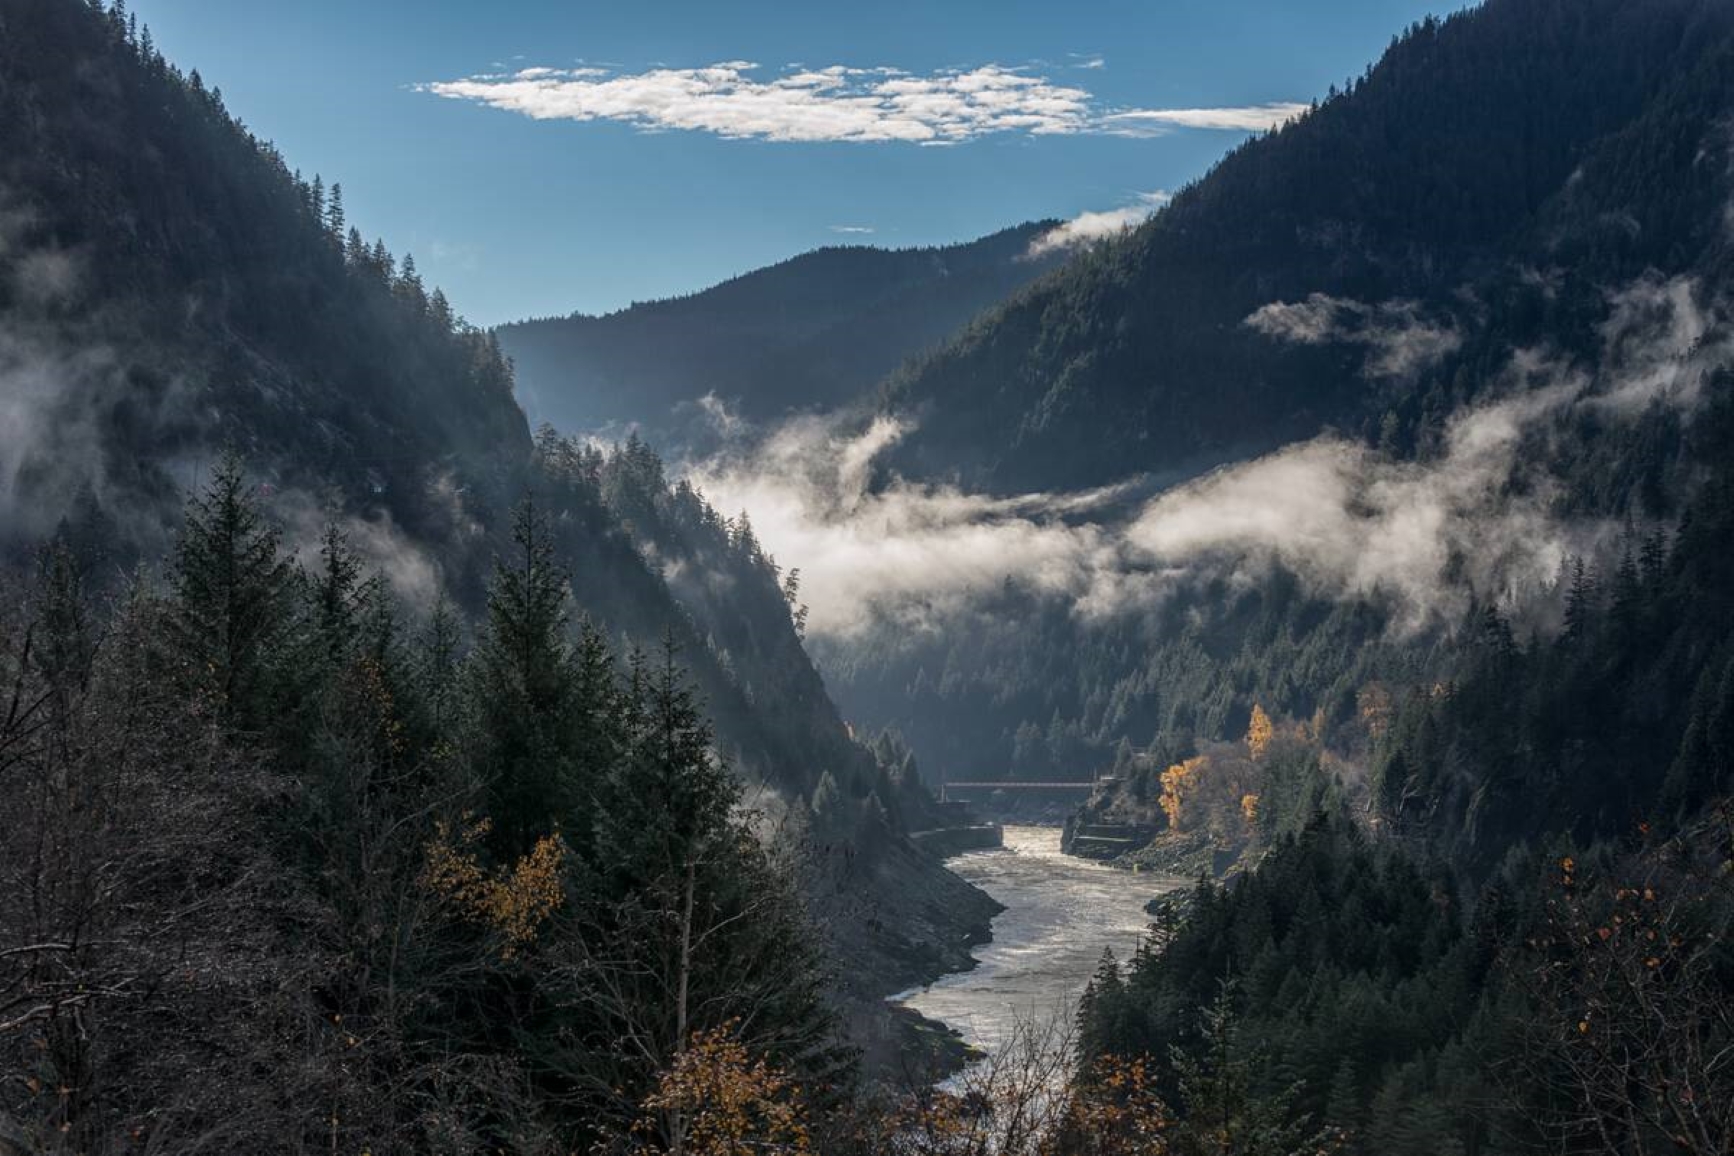 The Fraser river canyon and the Alexander bridge. Surrounding the the bridge and river are mountains covered in thick forest.  Photo credit: Destination BC.  